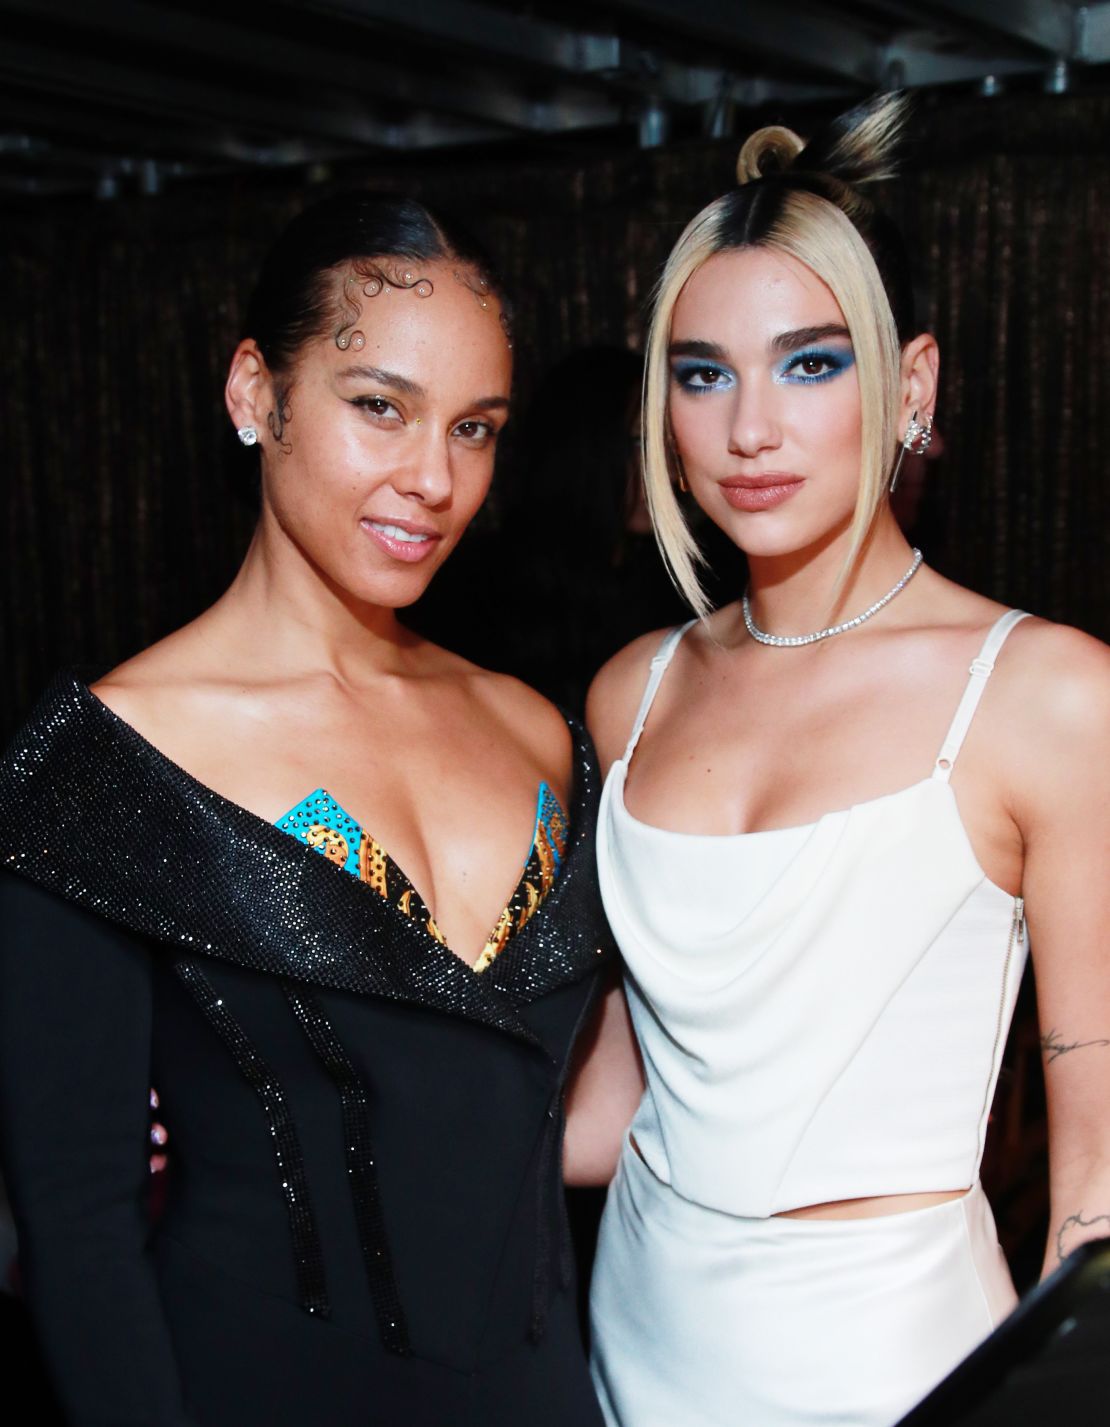 Alicia Keys and Dua Lipa attend the 62nd Annual Grammy Awards